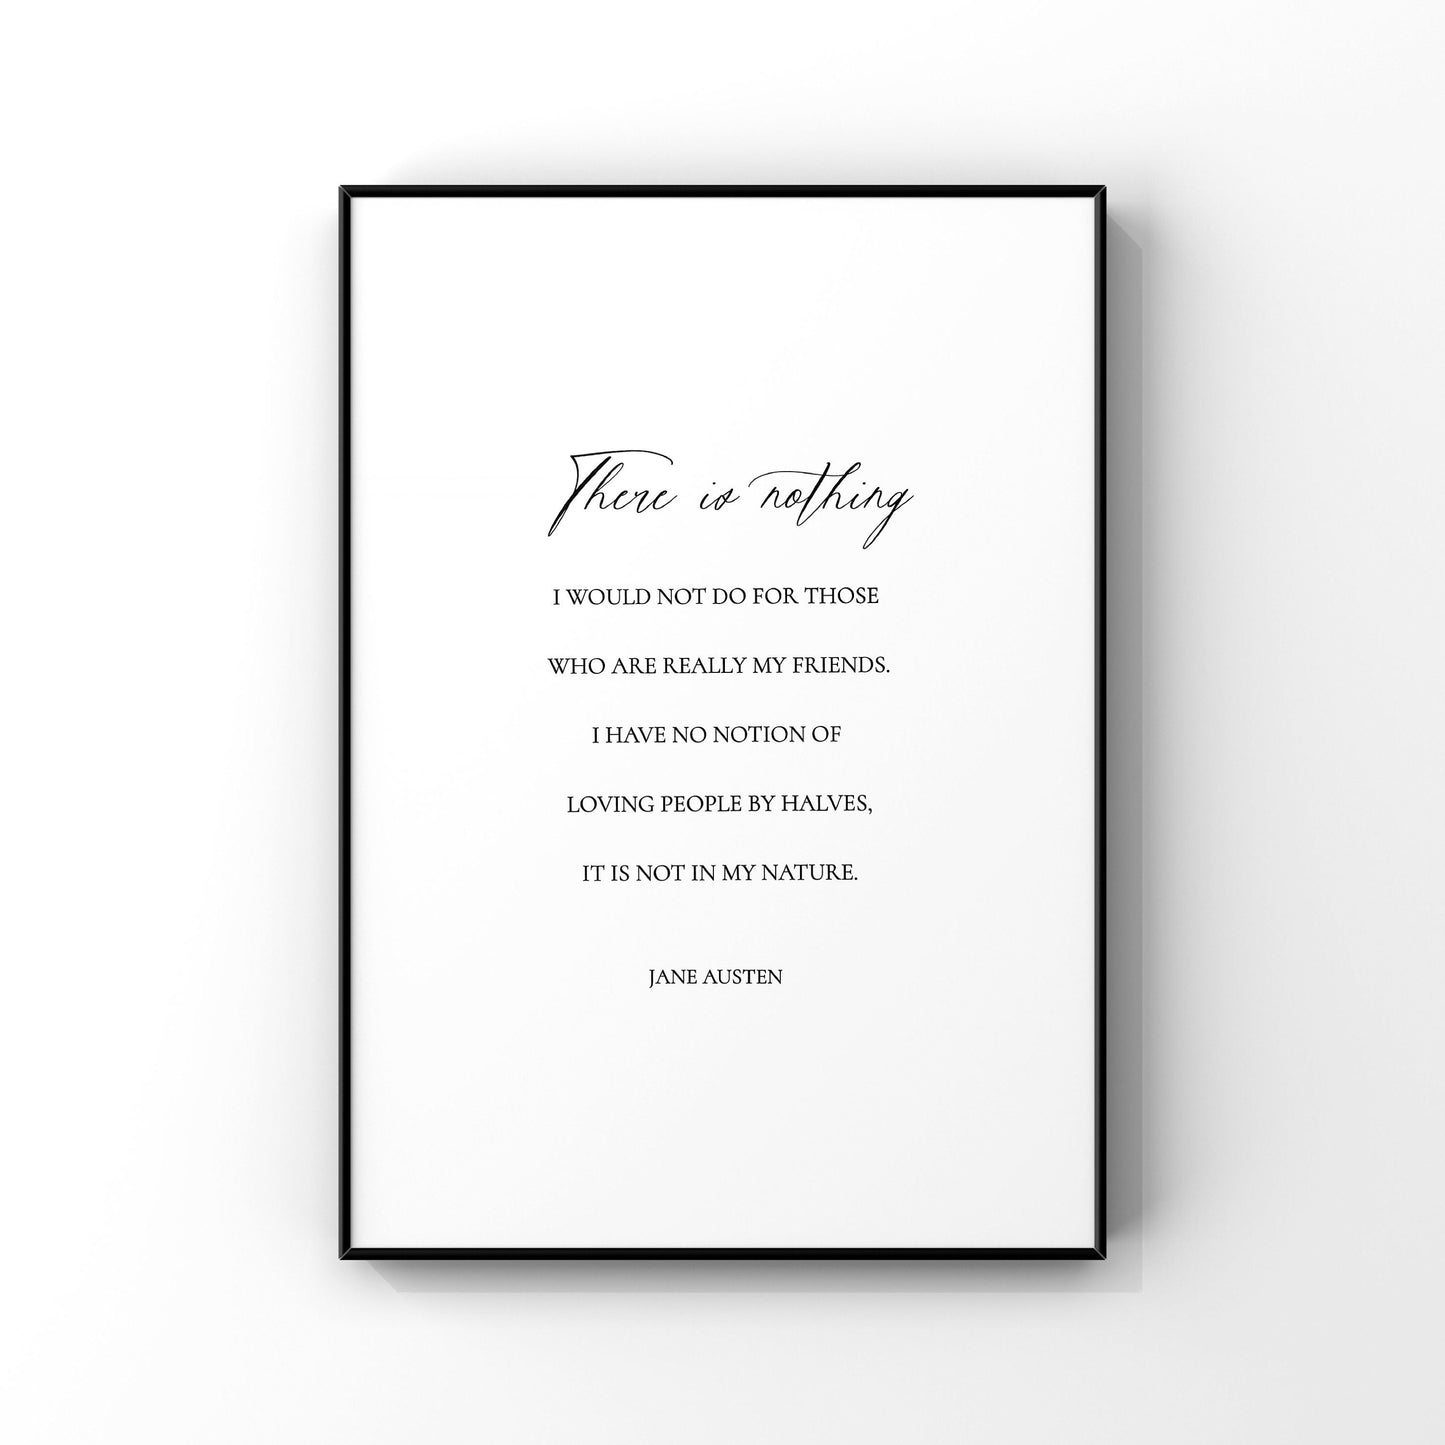 There is nothing I would not do,Jane Austen quote,Friendship quote,Gift for friend,Inspirational print,Motivational saying,Friendship gift